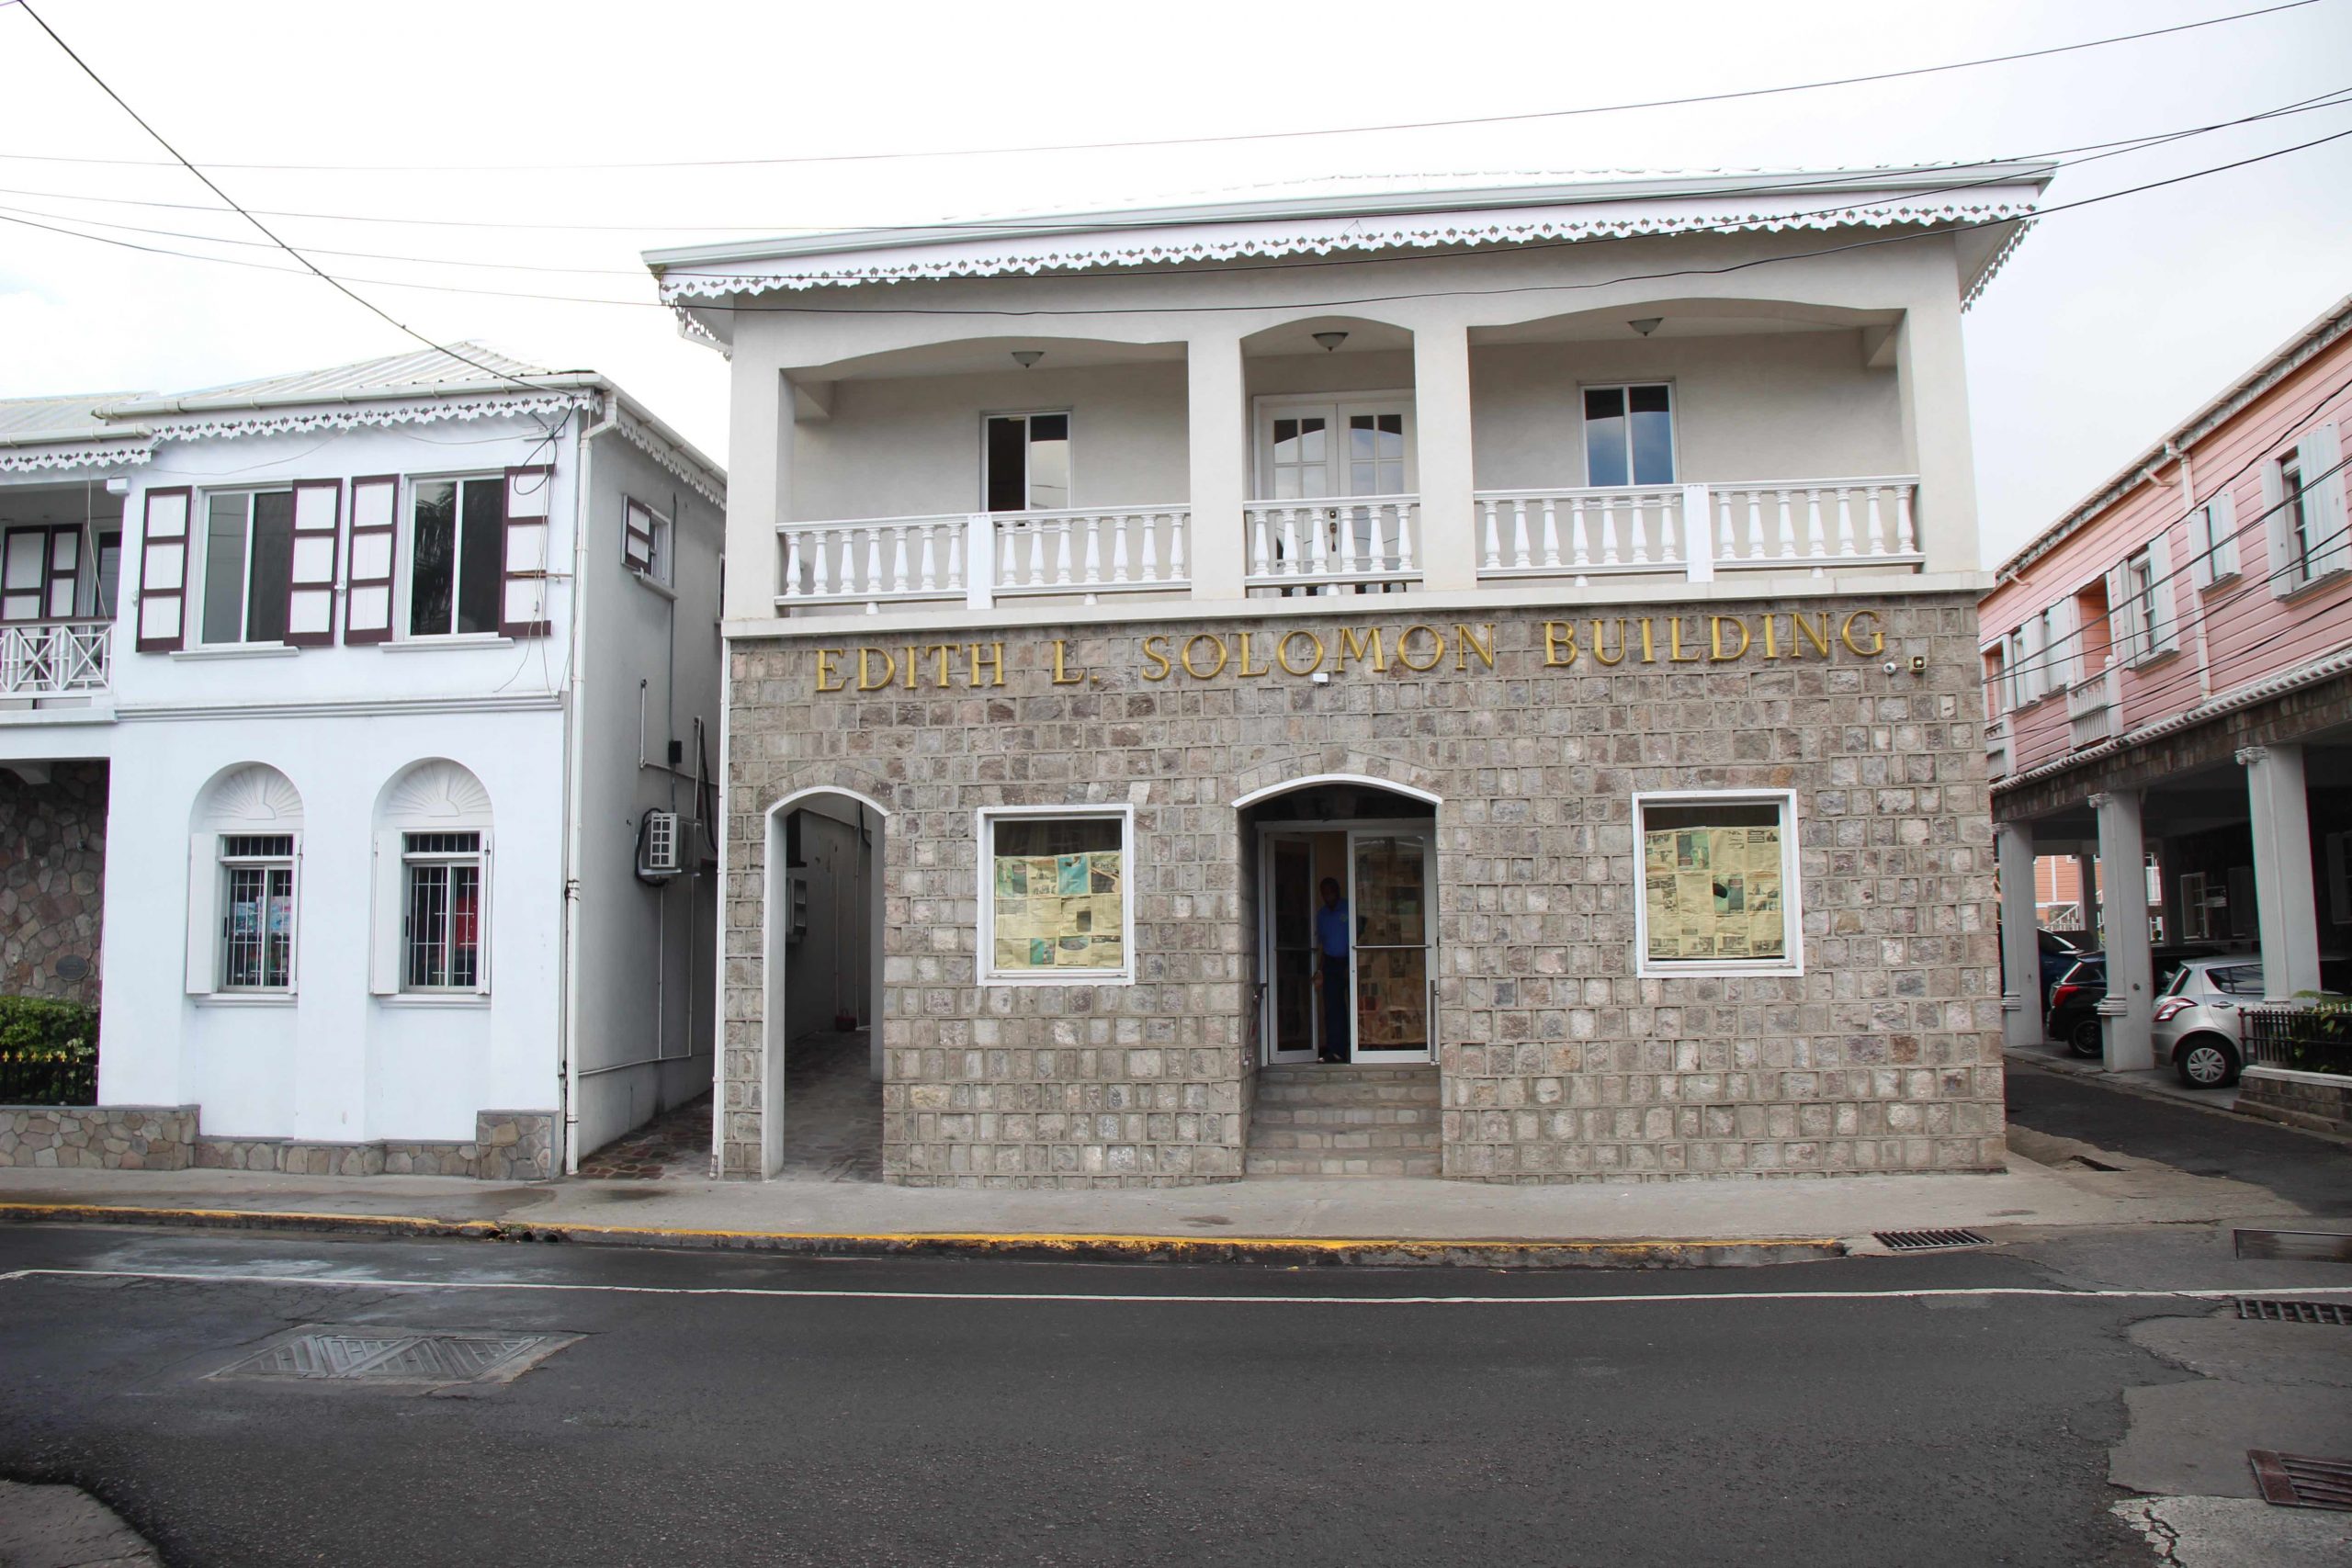 The Nevis Water Department’s new location from March 16, 2021, the Edith L. Solomon Building on the Island Main Road in Charlestown